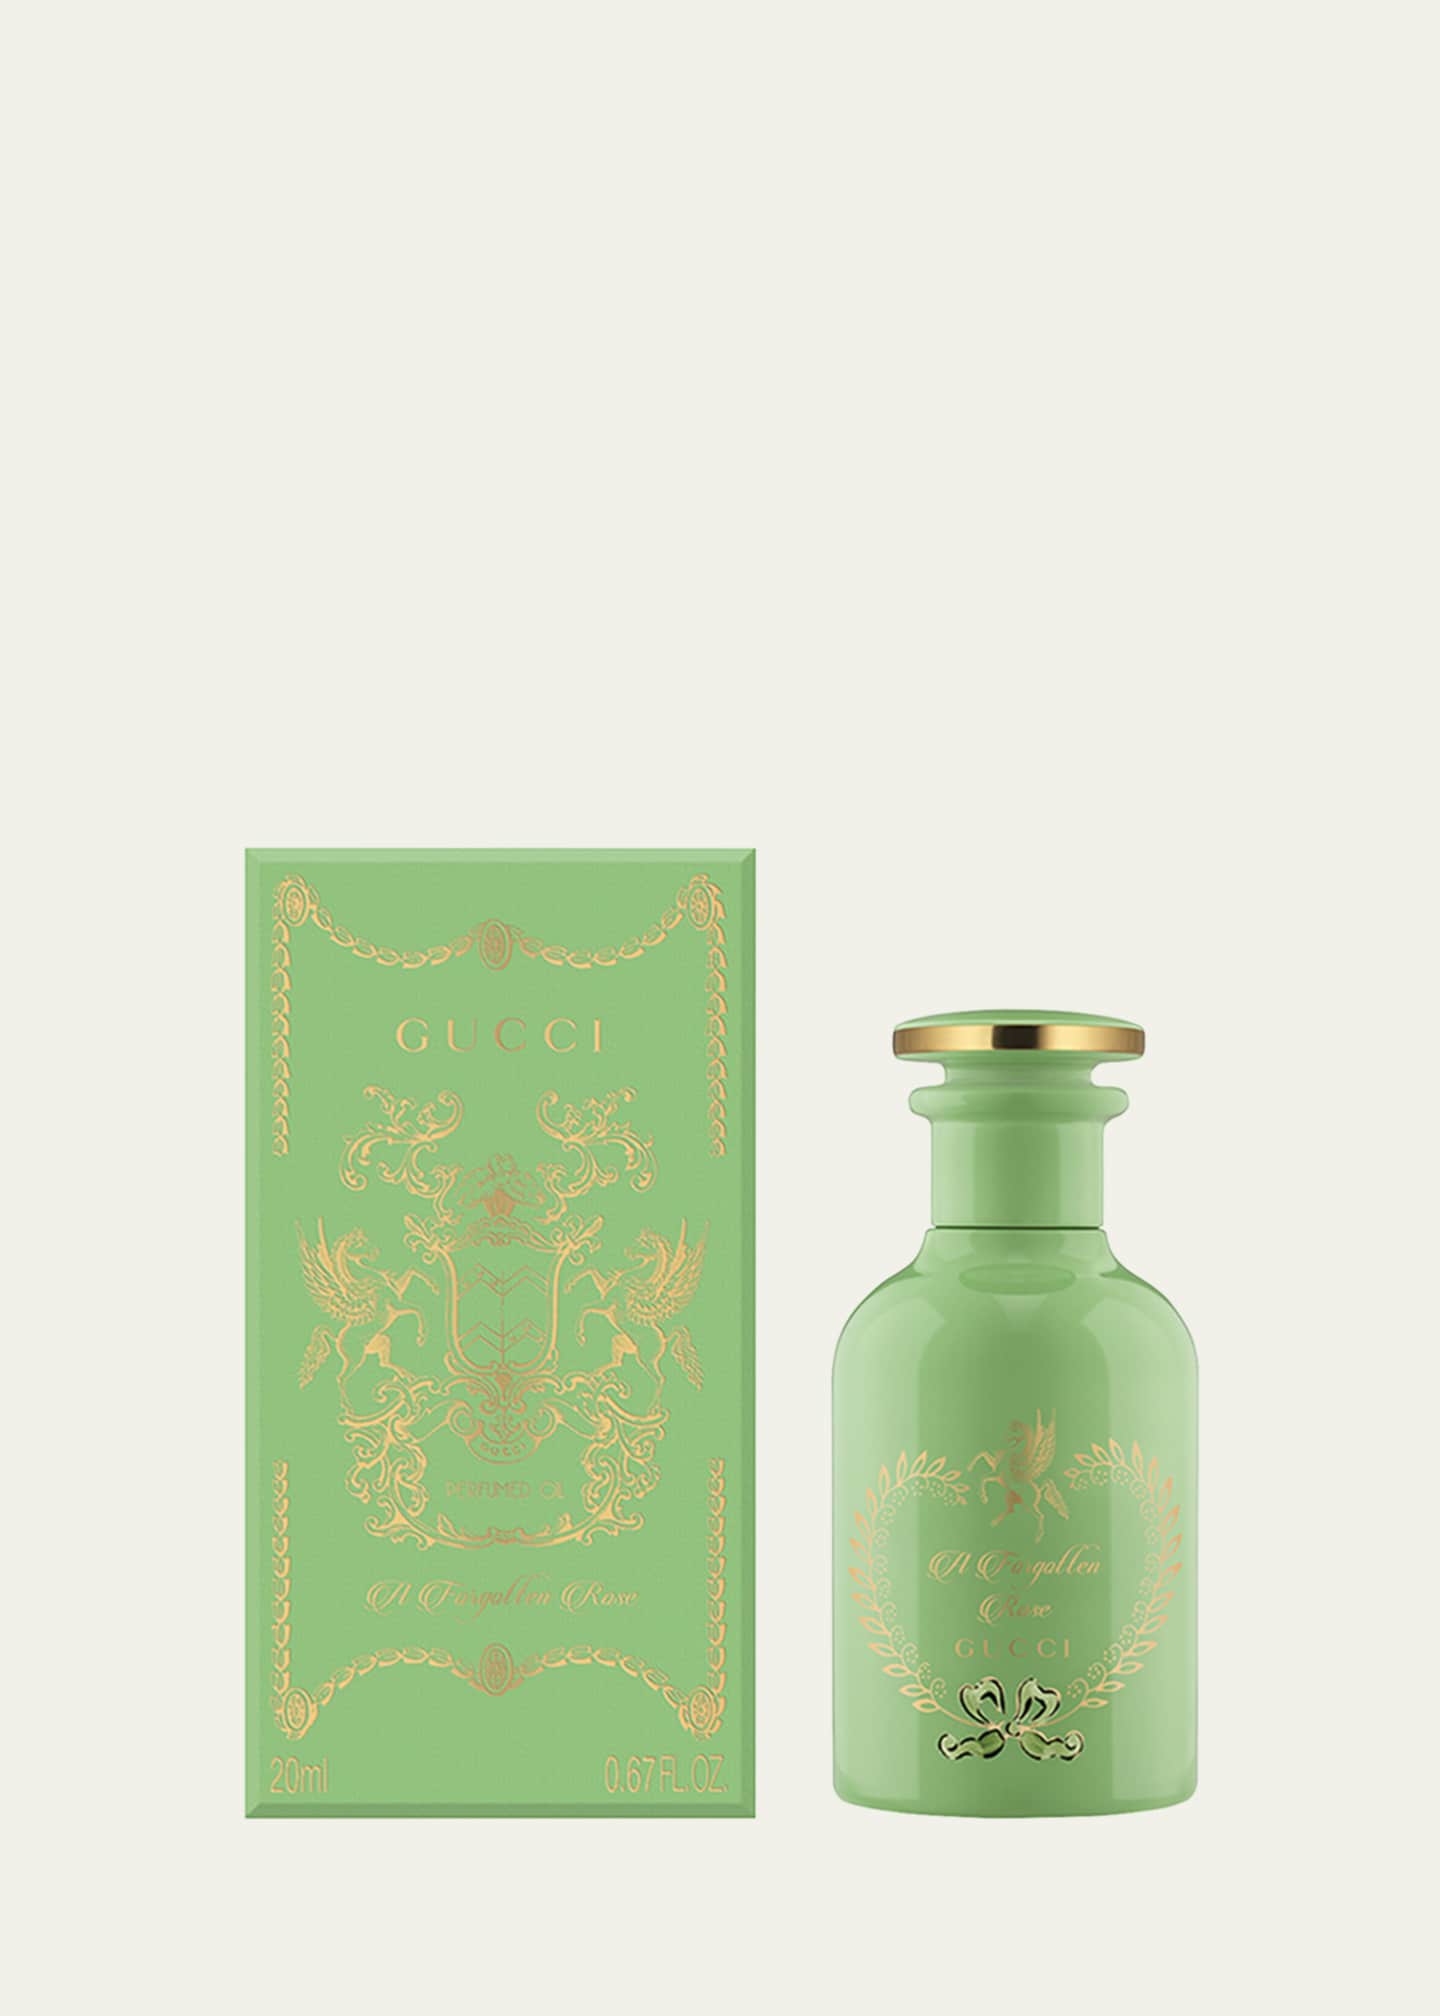 Gucci The Alchemist's Garden A Forgotten Rose Perfumed Oil, 0.67 oz./ 20 mL Image 2 of 5